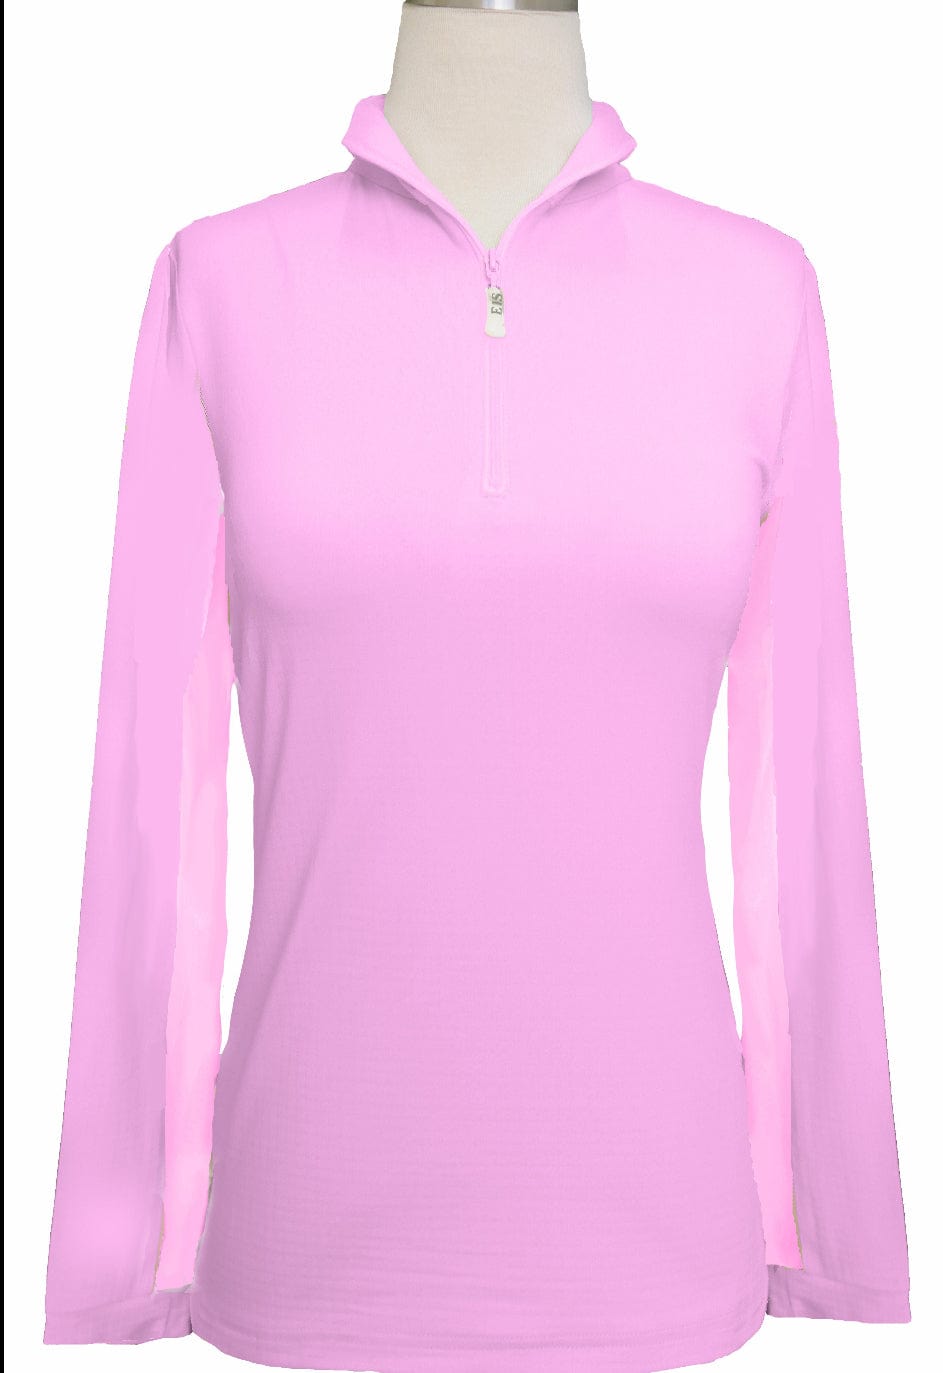 EIS Custom Team Shirts Pink EIS- Sunshirts XS equestrian team apparel online tack store mobile tack store custom farm apparel custom show stable clothing equestrian lifestyle horse show clothing riding clothes horses equestrian tack store